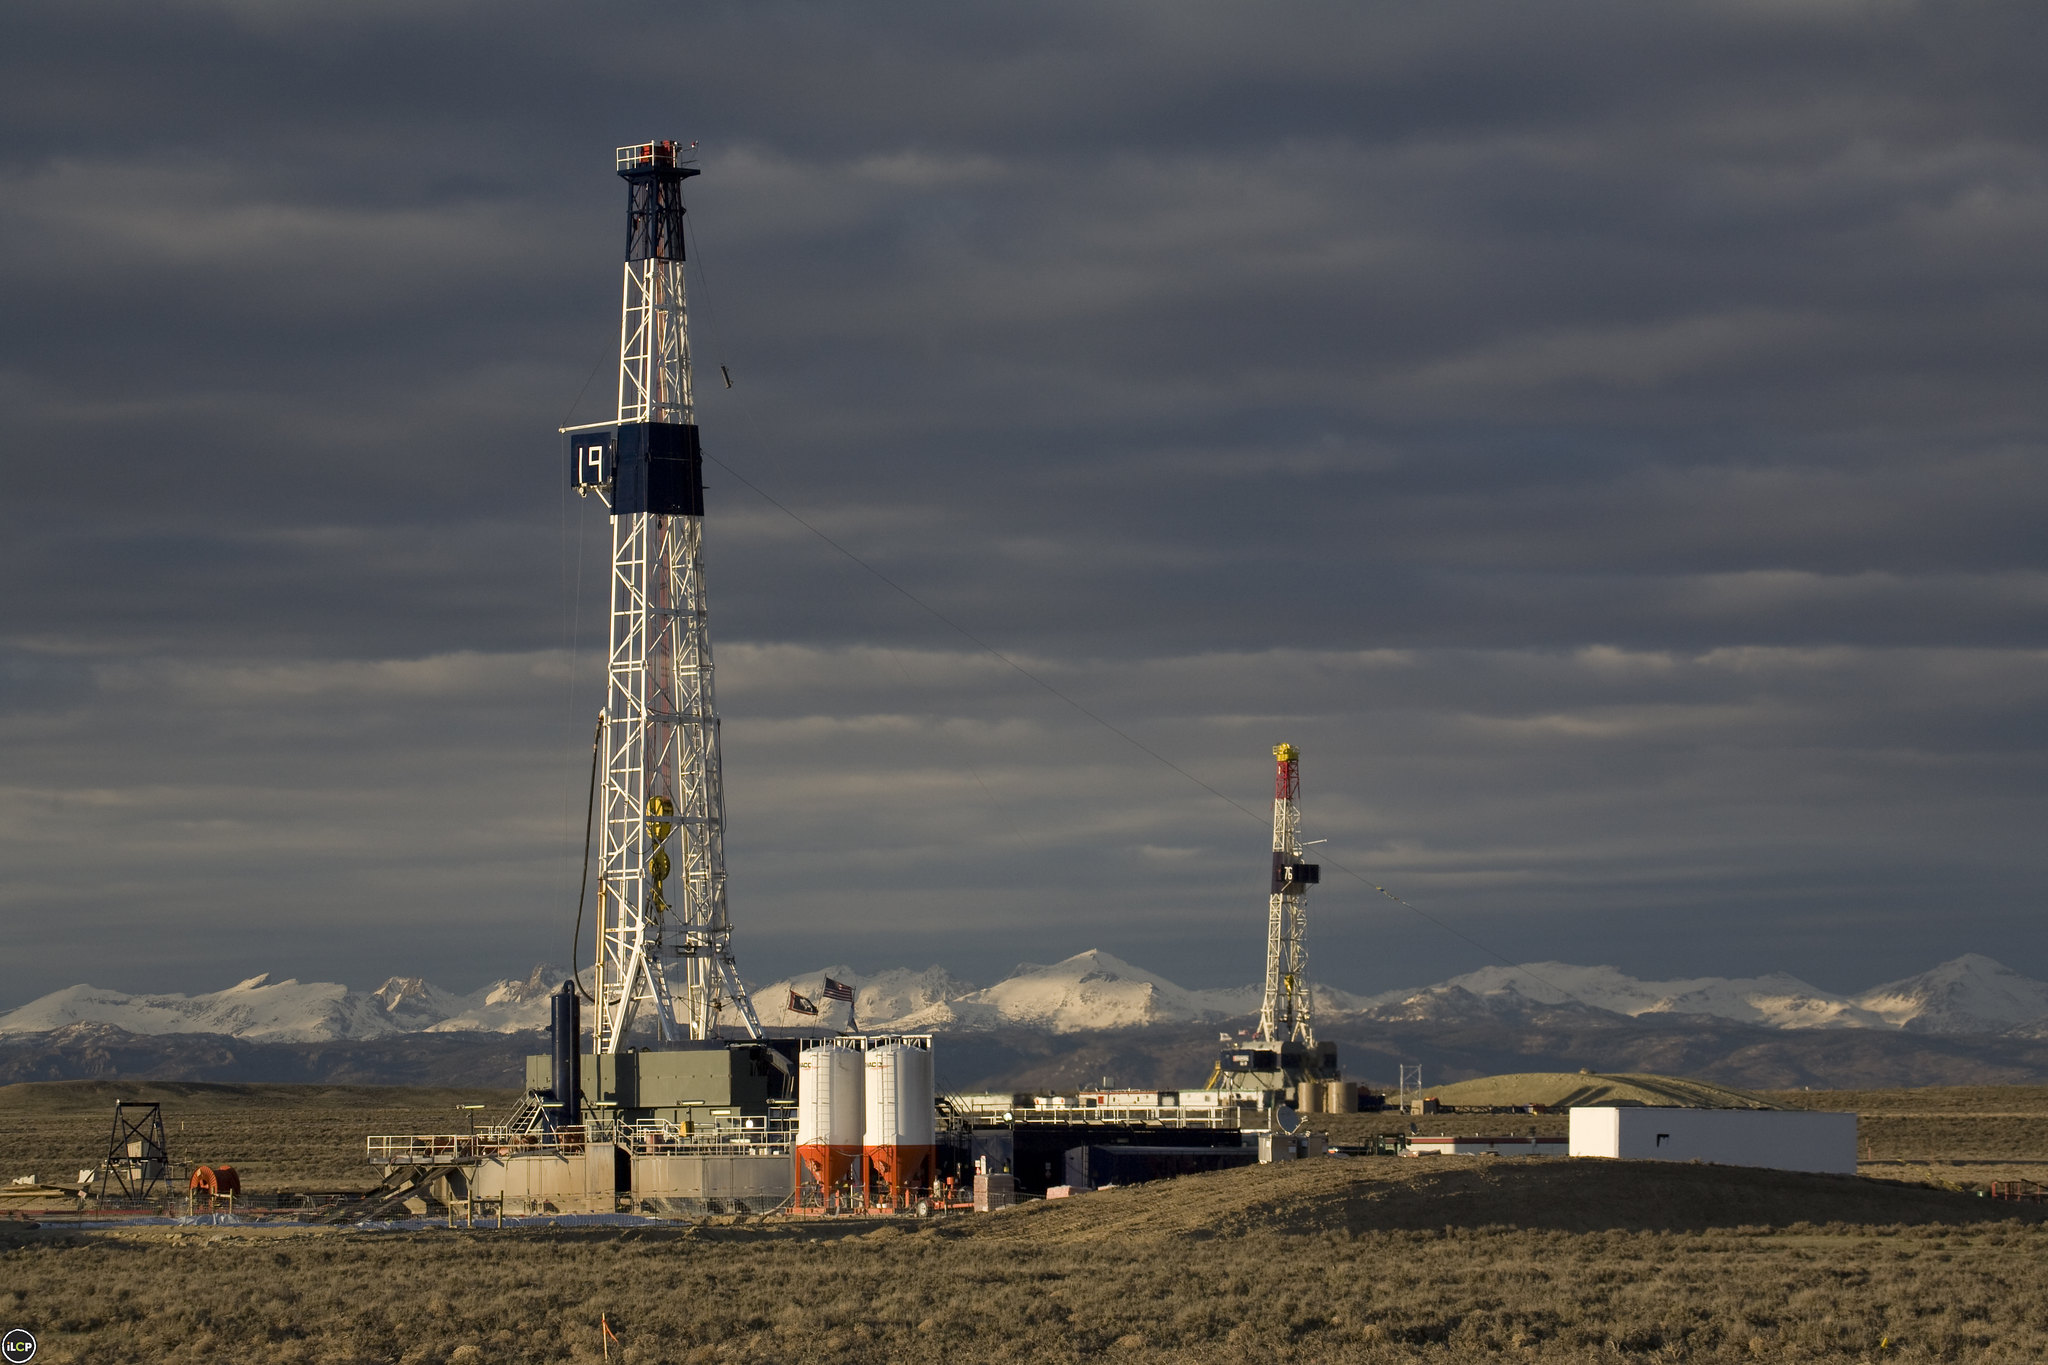 Photograph of drilling rigs in the Pinedale Anticline Natural Gas Field, Wyoming. The photo shows two drill rigs, one in the foreground, one in the background, with associated equipment. The rigs are on a flat, scrubby landscape. Snow-capped mountains can be seen on the horizon. The sky is overcast.